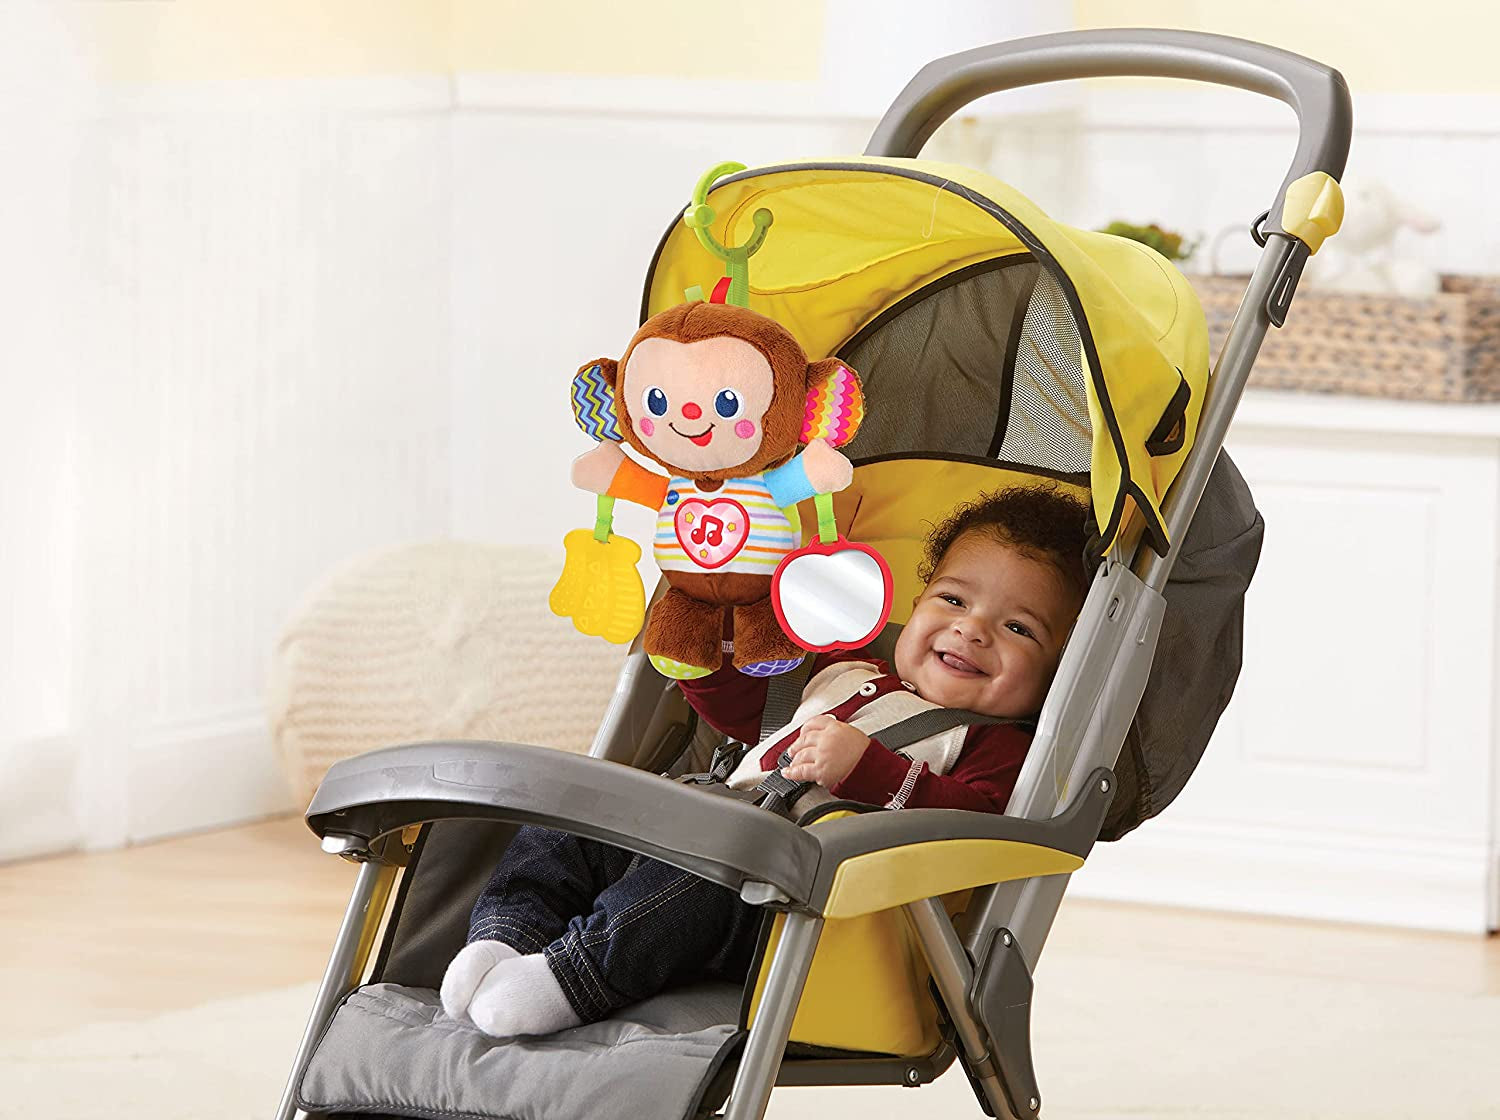 VTech Swing & Sing Monkey, Cute Pram Toy with Lights, Music and Colours, Cuddly Toy with Self-Discovery Mirror and Teether, Soft Cuddly Toy with Tactile Stimulation, Baby Girls and Boys 3 Months +